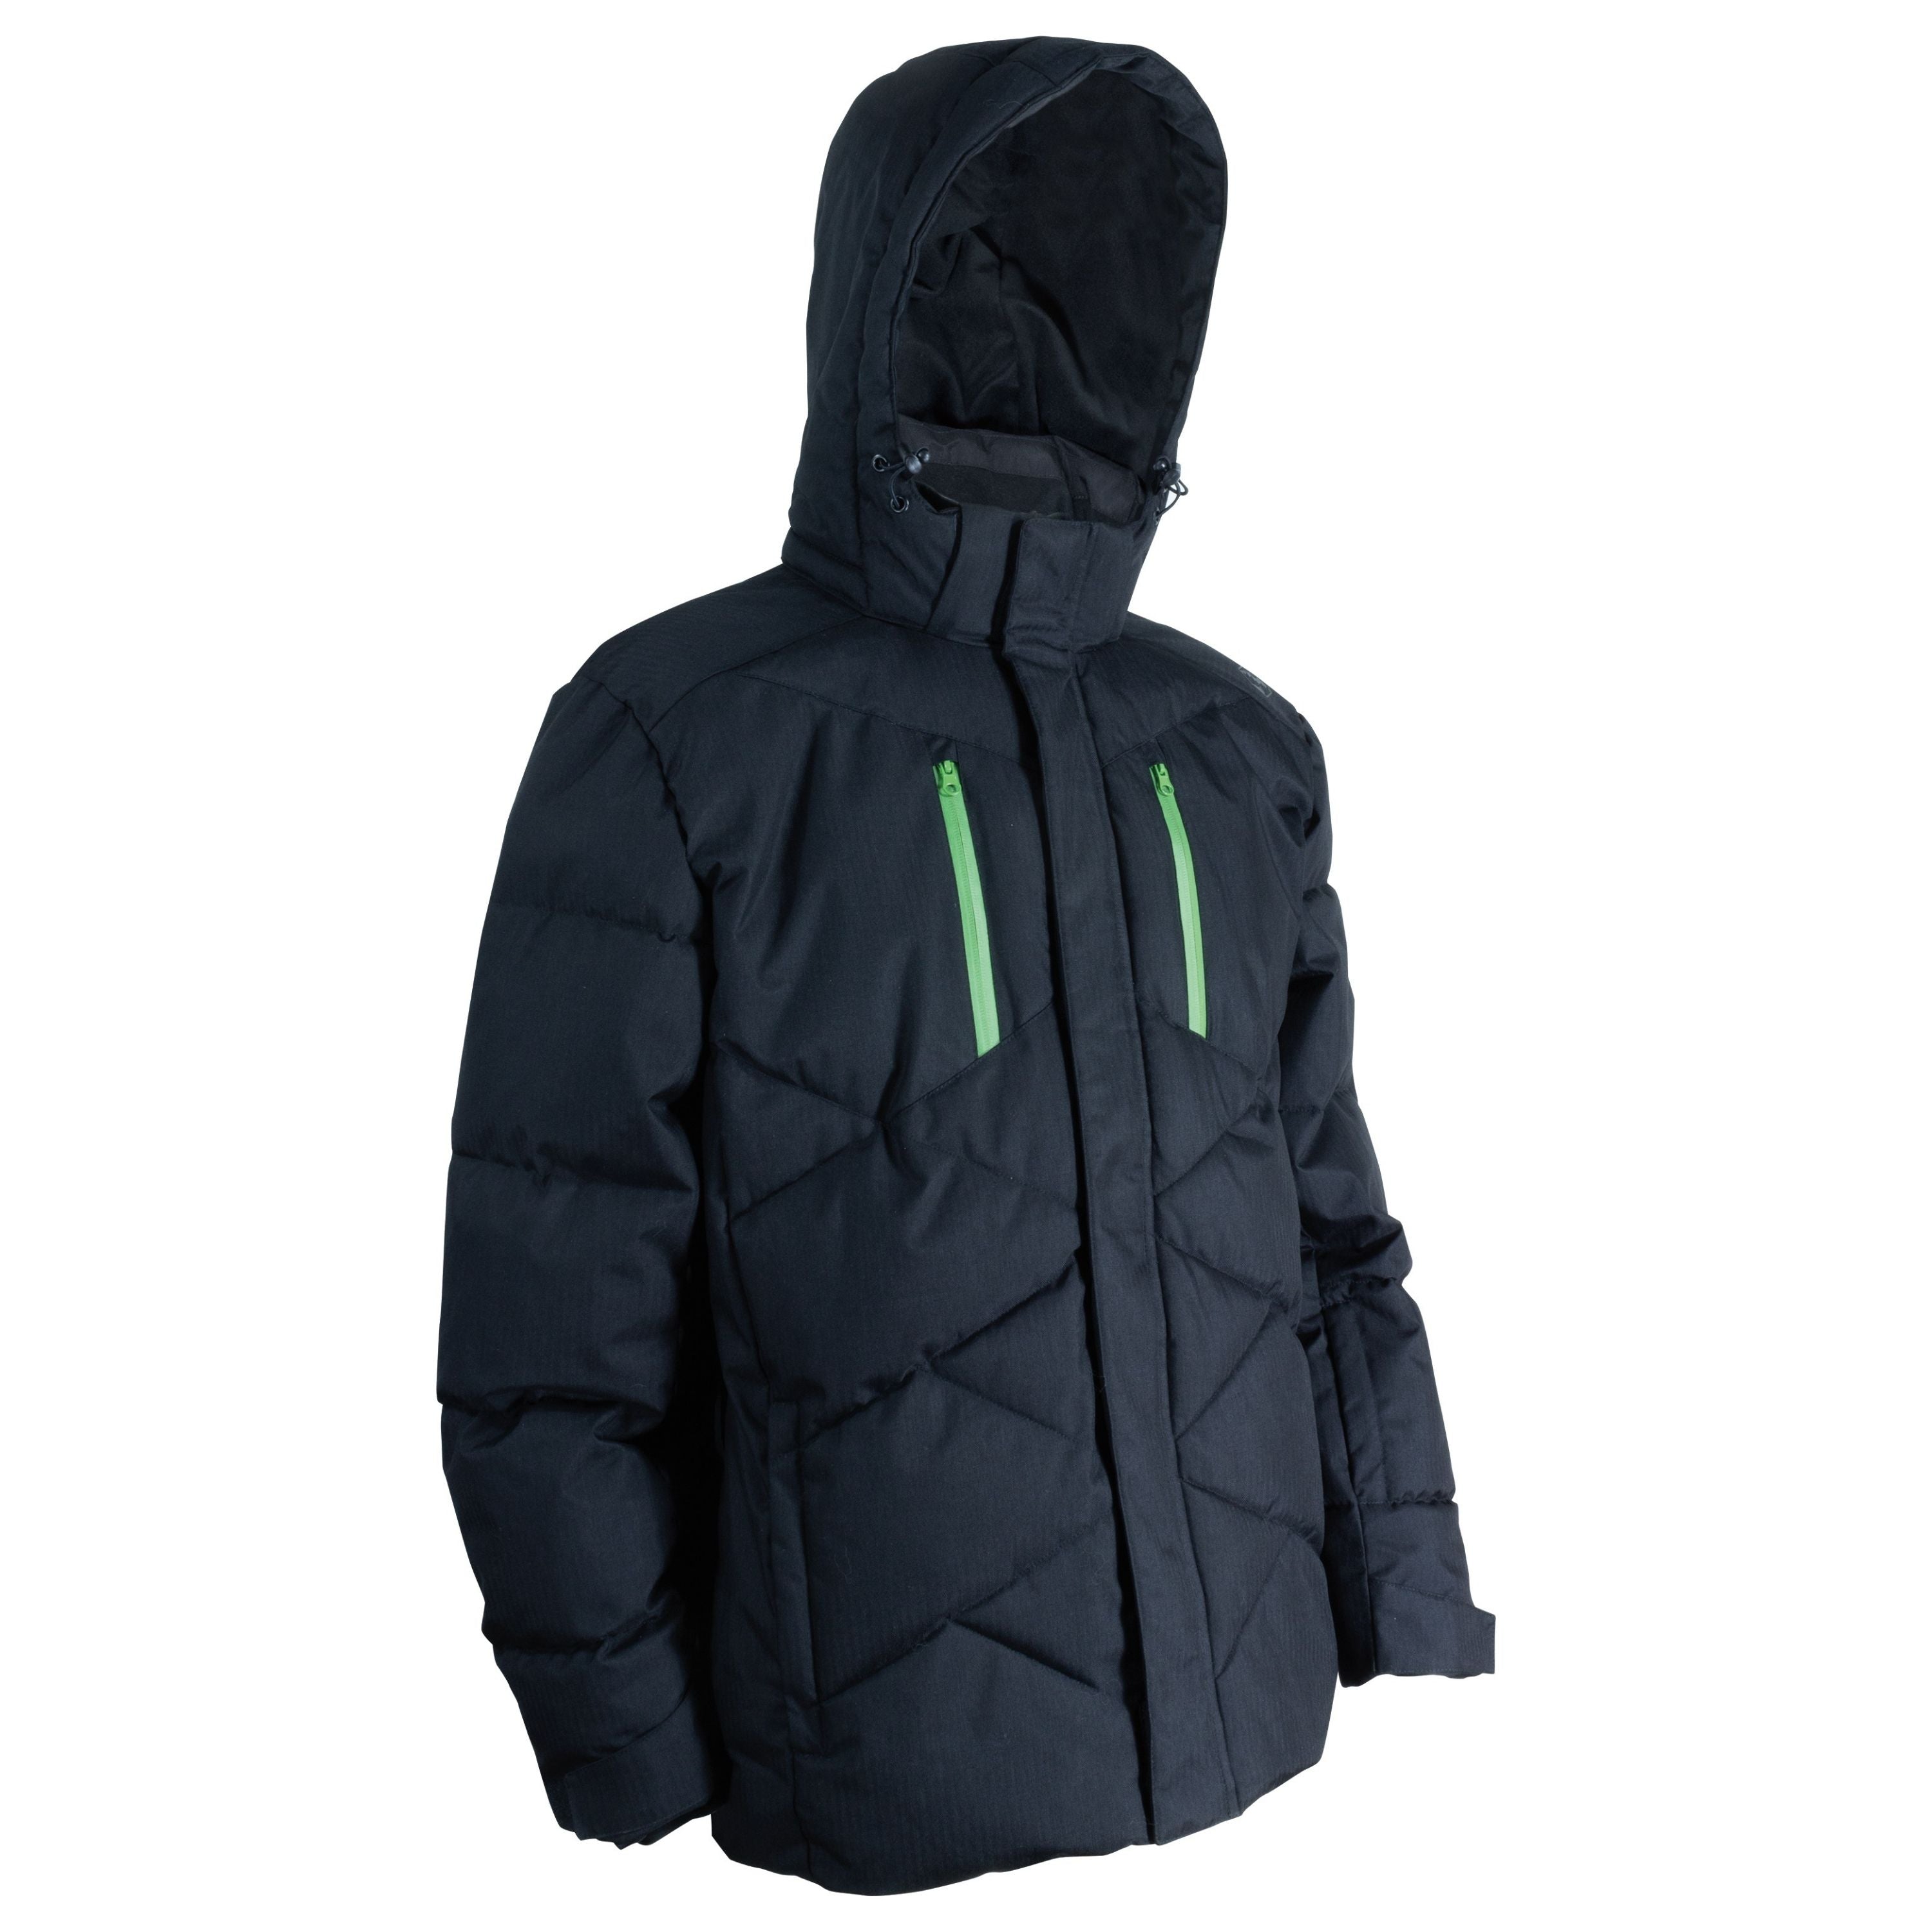 "Grand lux" insulated winter jacket - Men’s